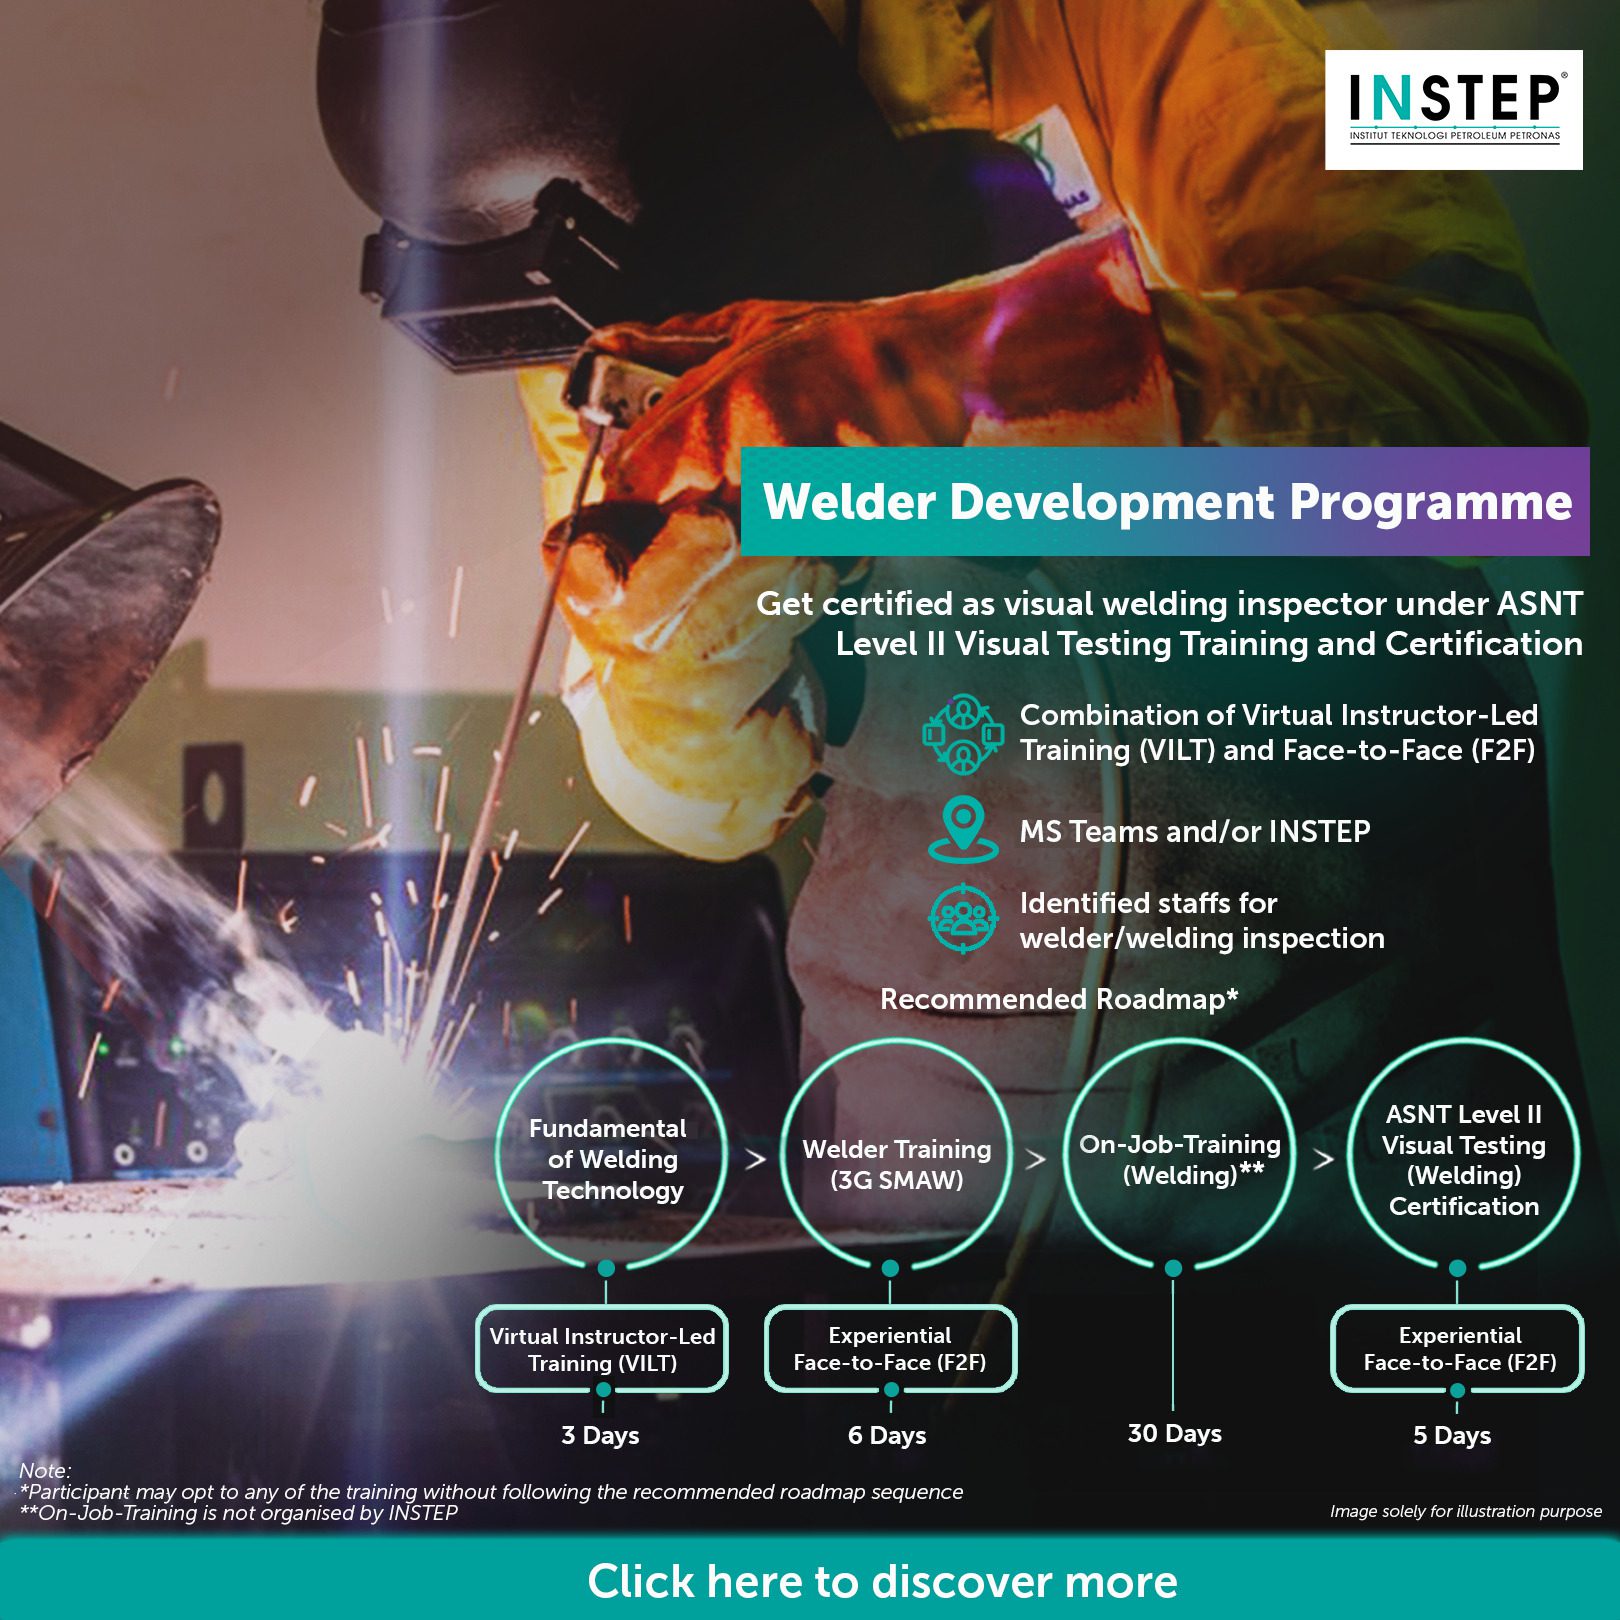 [MAY EDITION] Welder Development Programme via Face-To-Face (F2F) mode